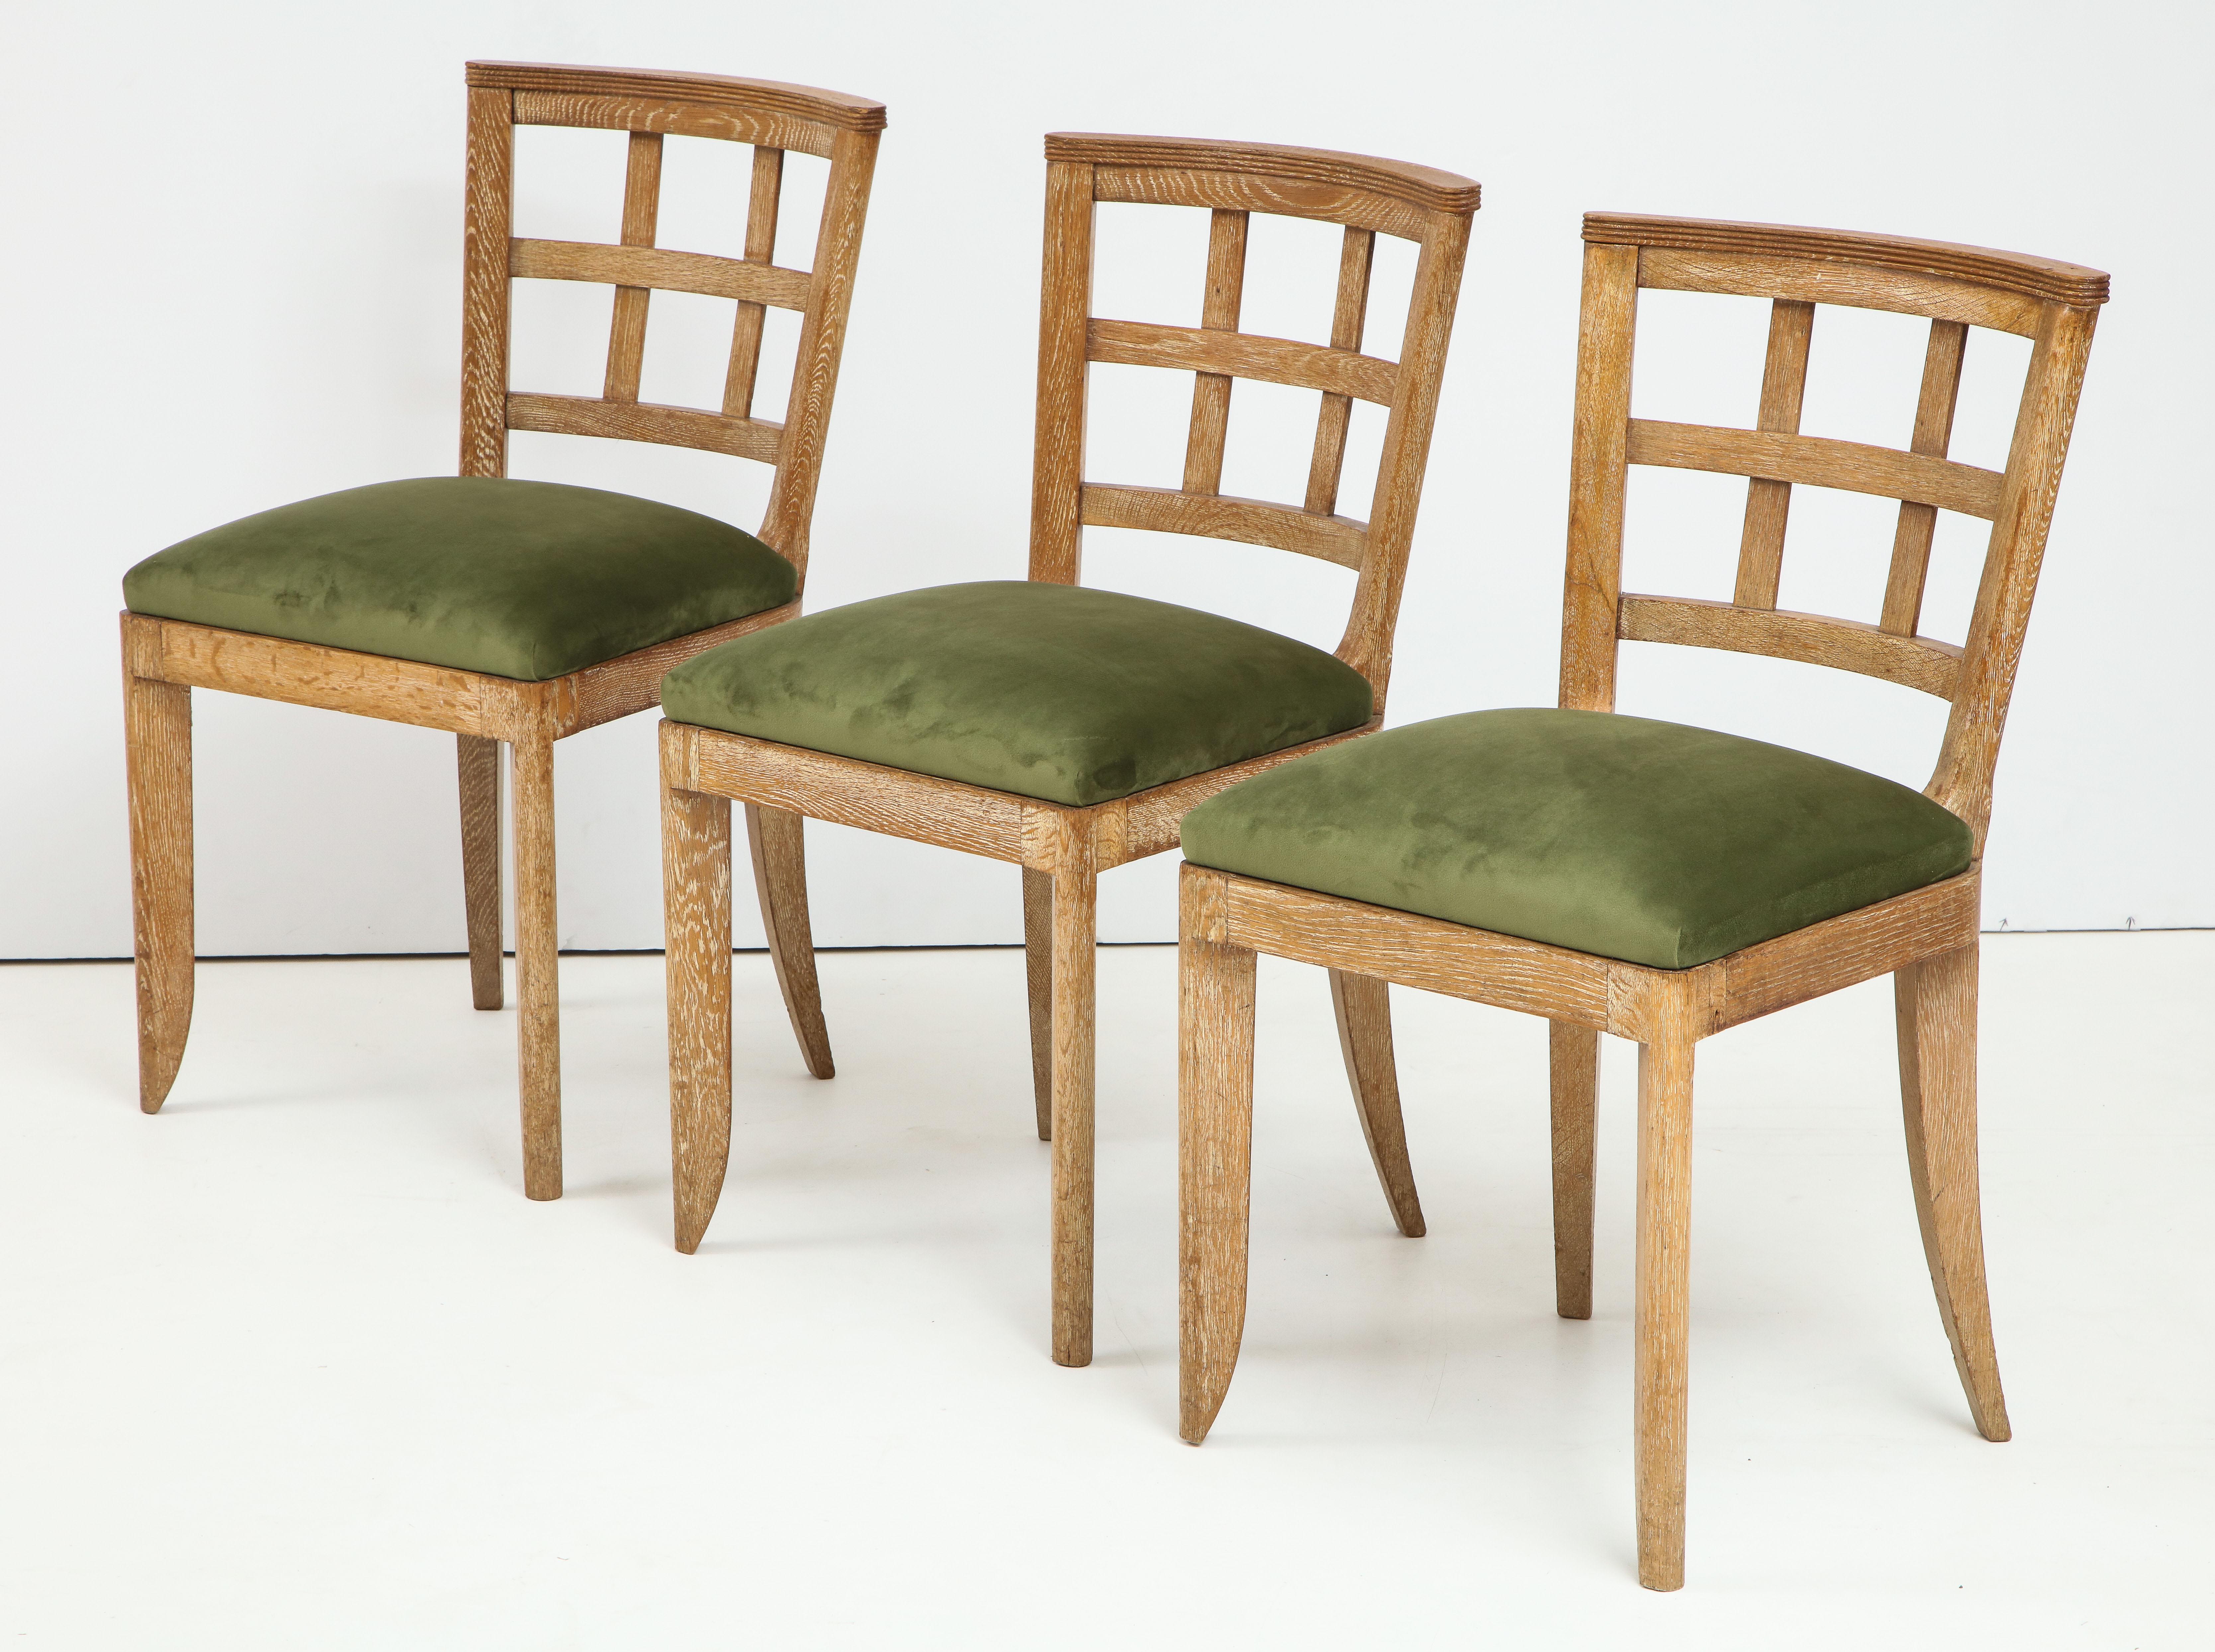 Set of 4 French Mid-Century Modern cerused oak dining chairs on tapered legs, recently reupholstered in green velvet, very comfortable

Measures: W 17.5 in, H 33 in, D 18 in, seat height 18.5.